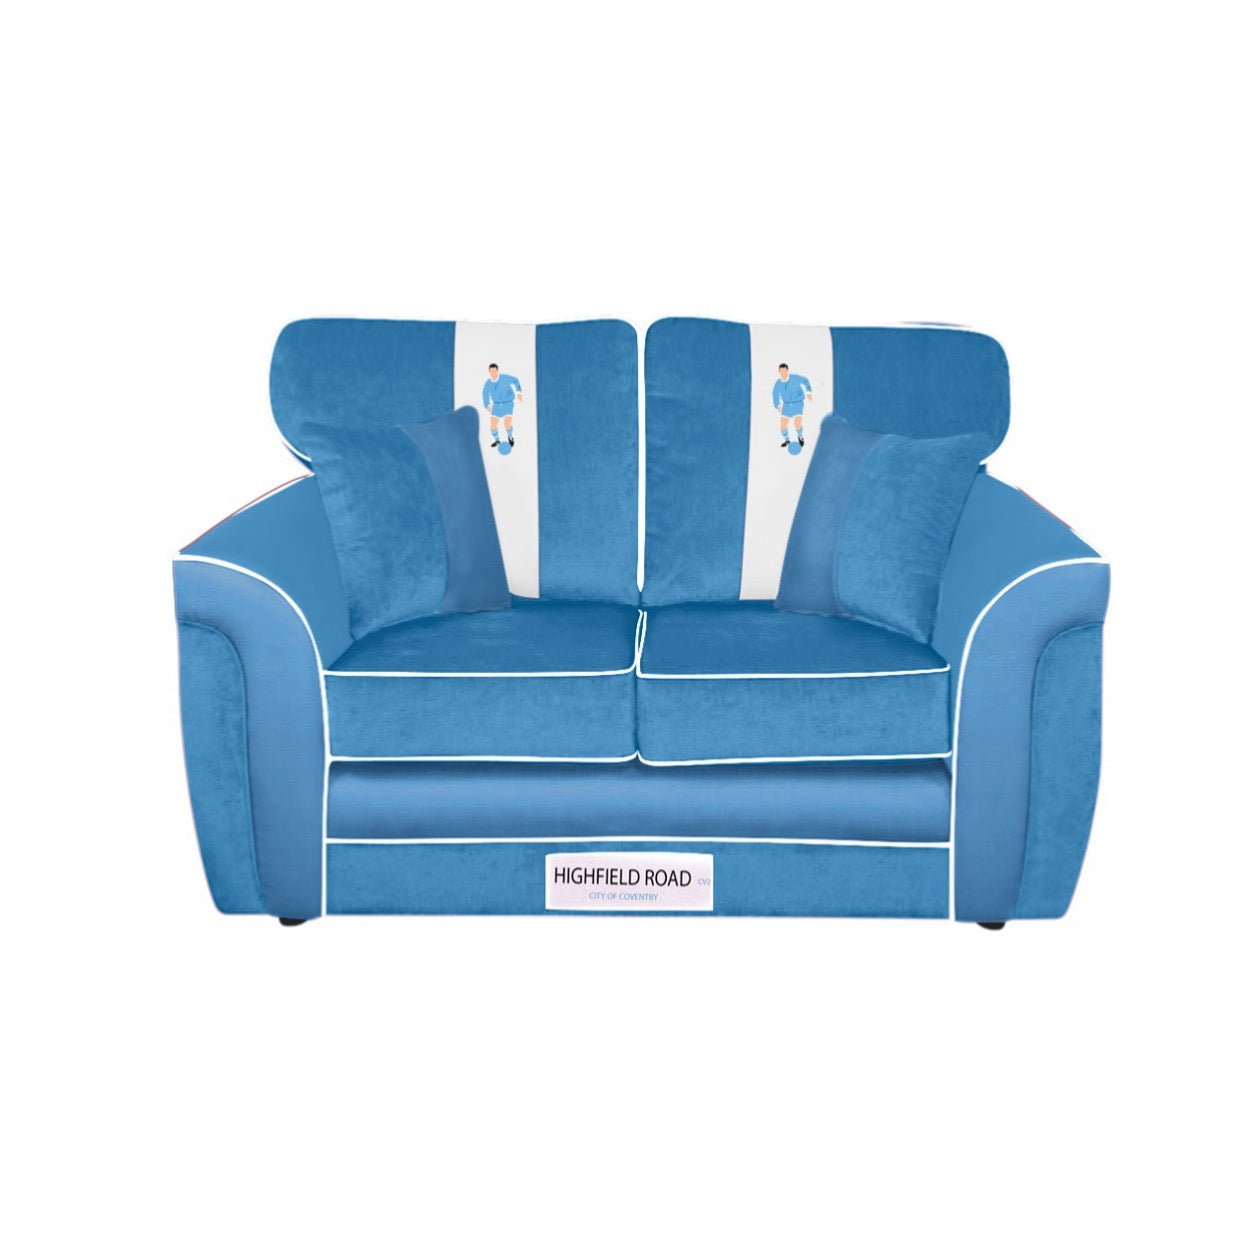 Highfield Road 2 Seater Sofa (Coventry City FC)